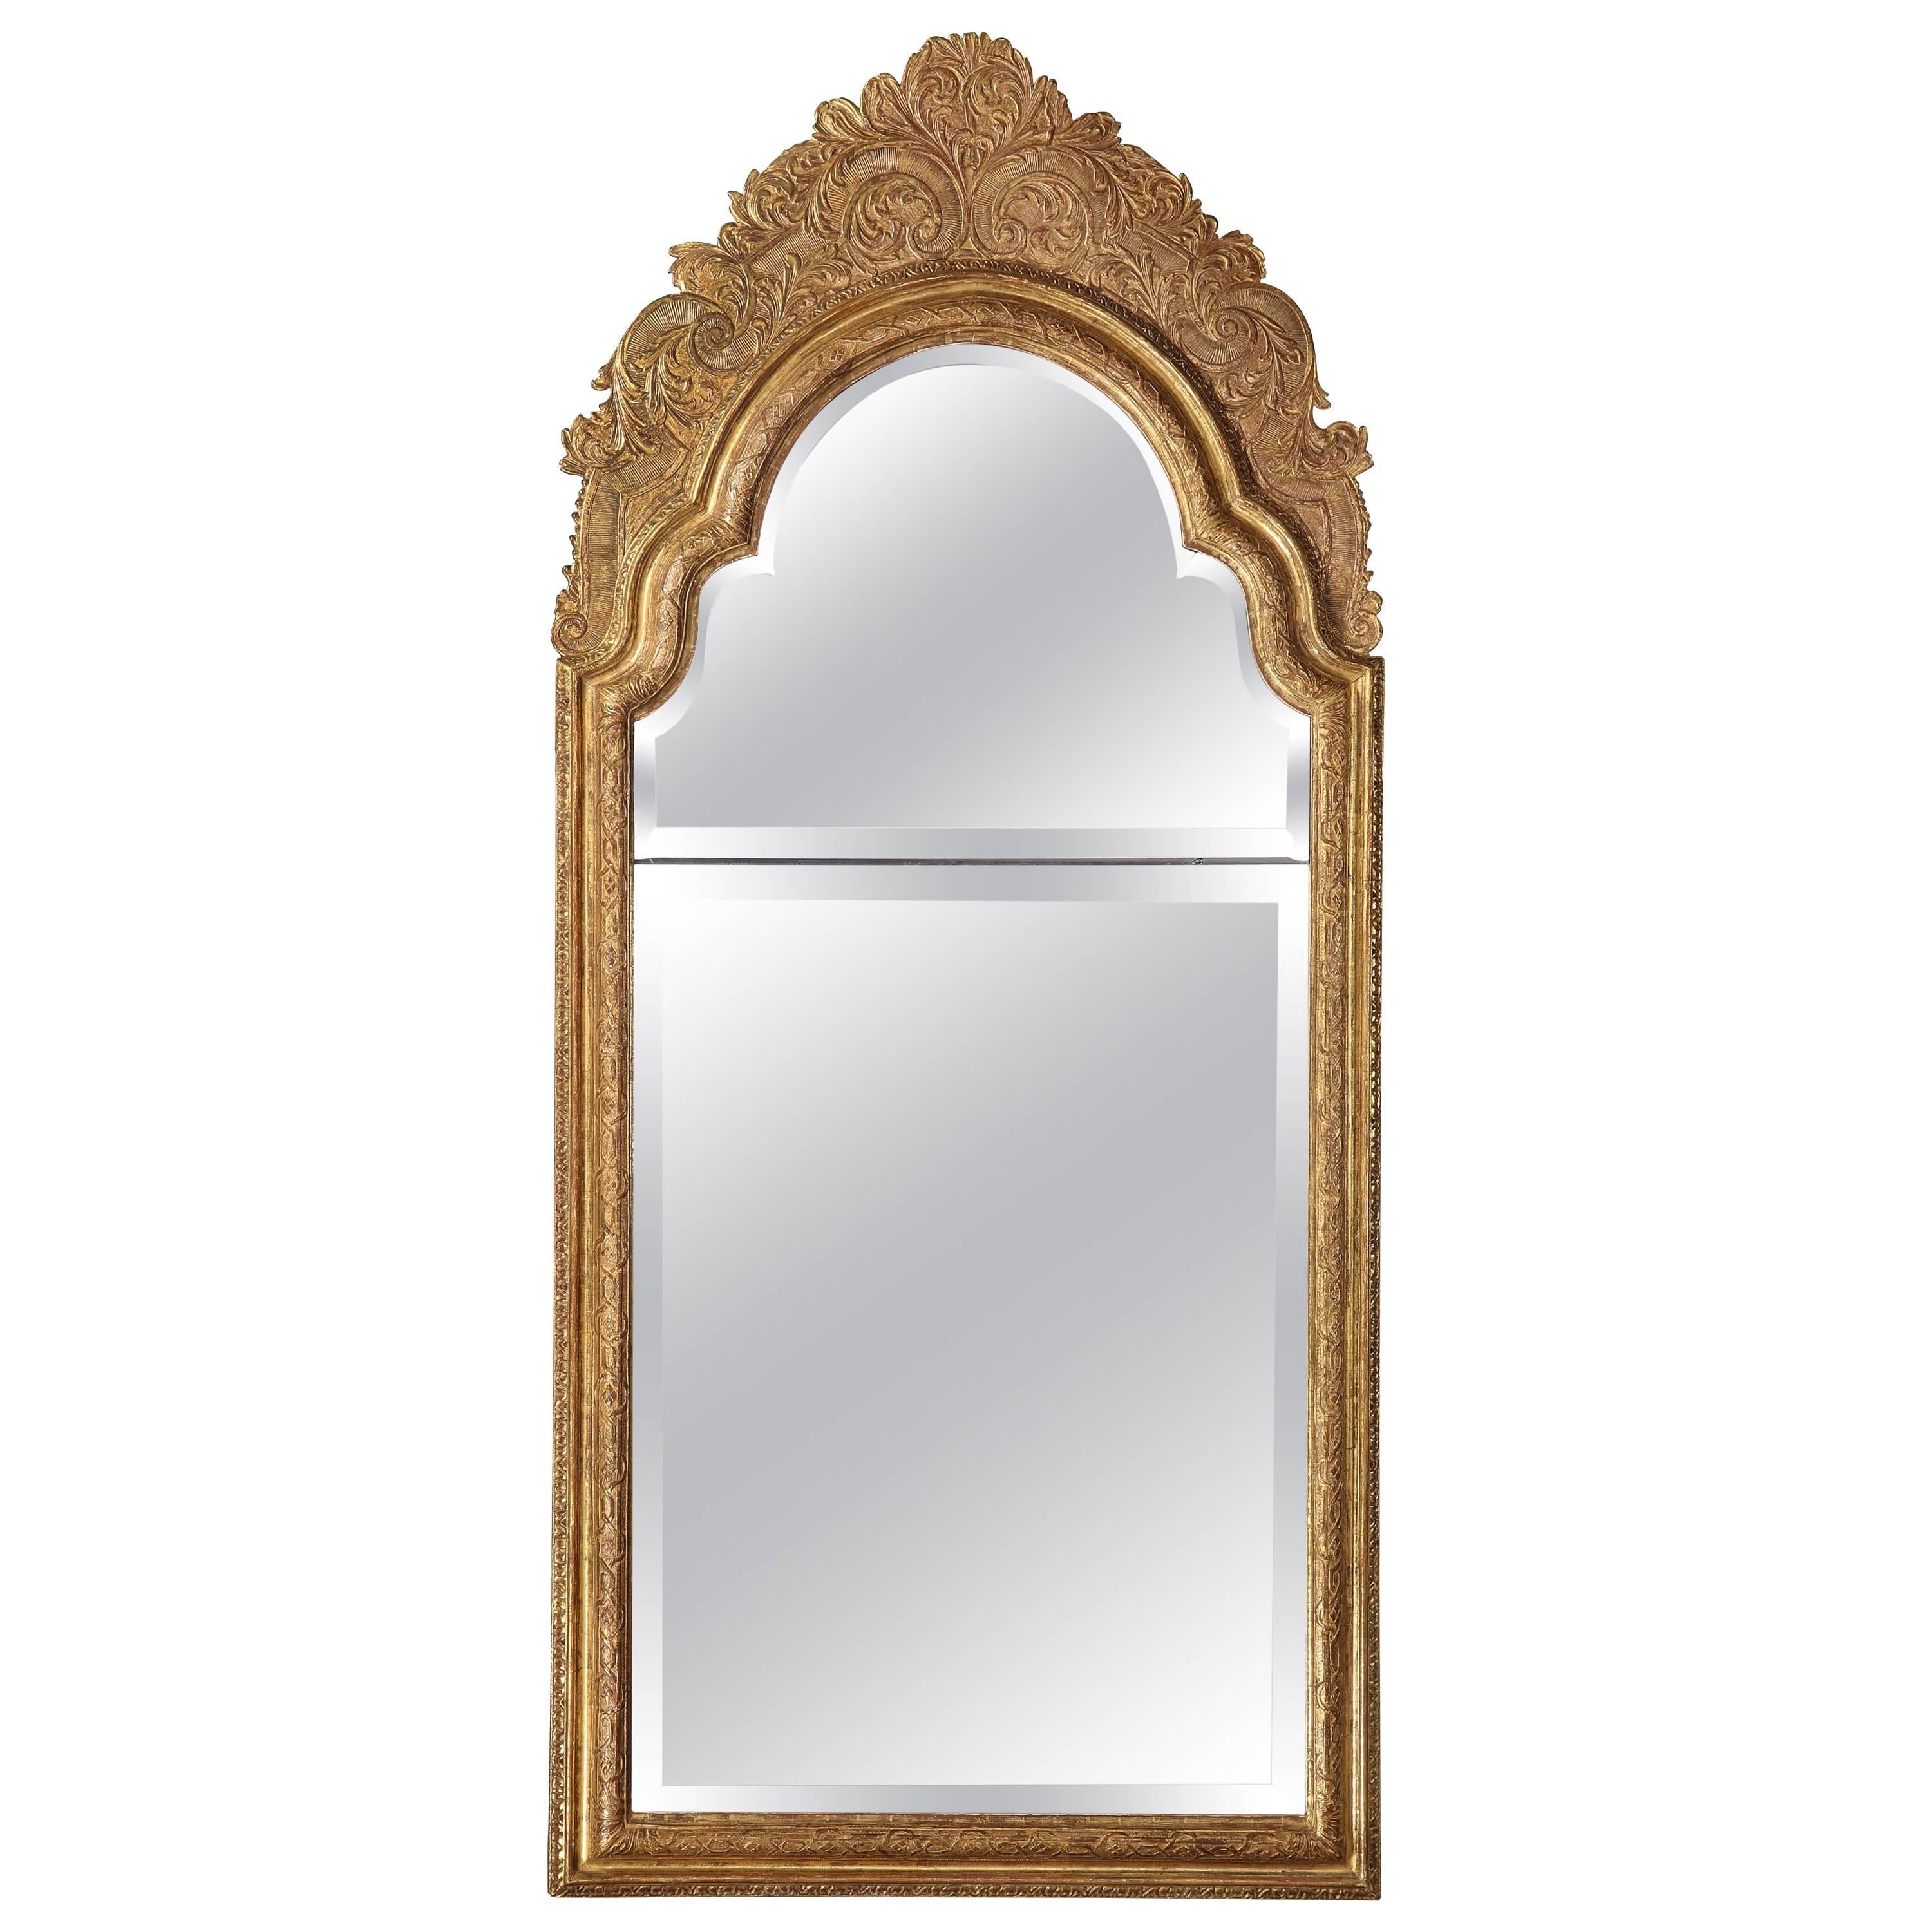  Queen Anne Giltwood Pier Glass Mirror For Sale